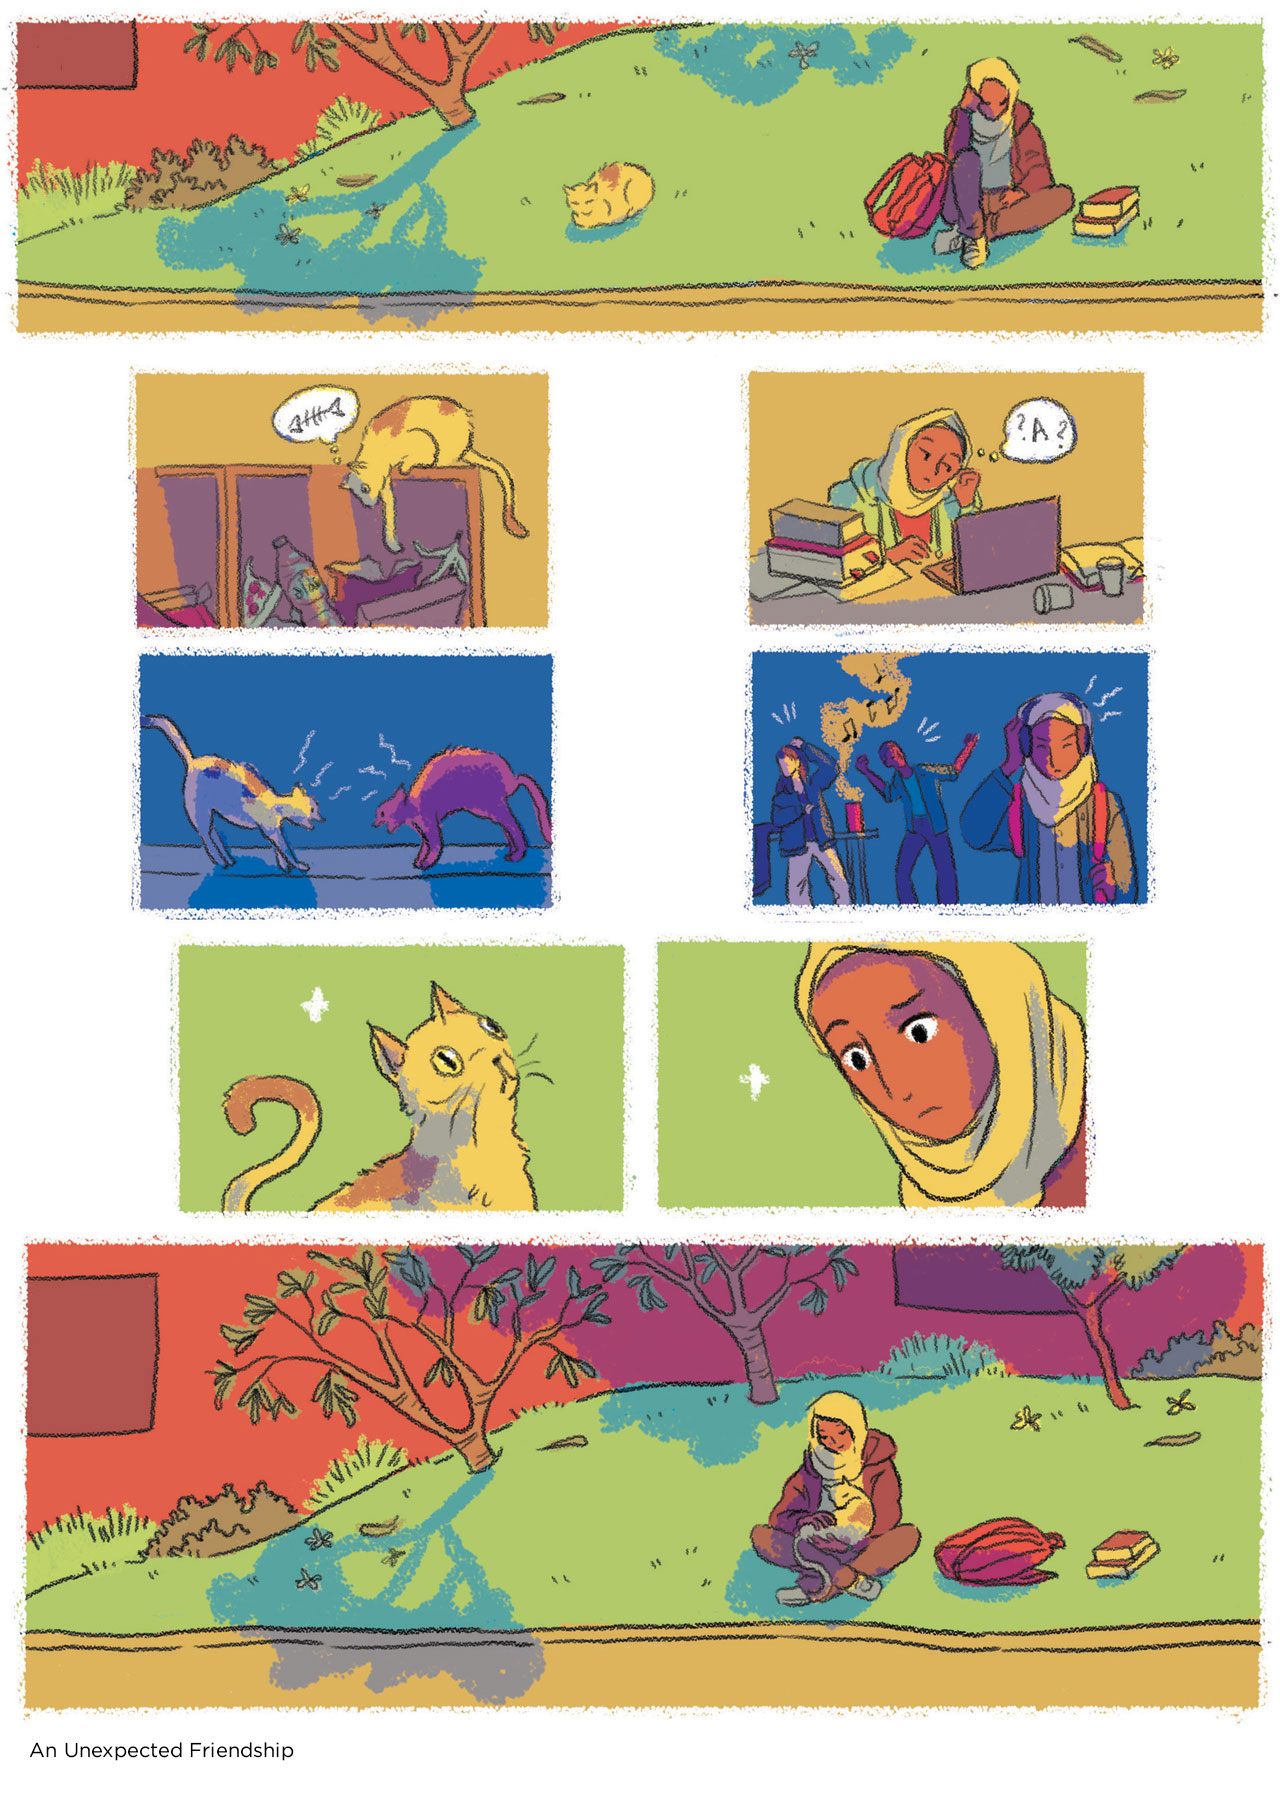 A comic drawn by student artist Shenuka Corea. Panel one: A female NYU Abu Dhabi student wearing a head scarf sits on the grass surrounded by her books and backpack. A cat sits nearby. Panel two: The cat remembers fishing through dumpsters looking for food. Panel three: The student remembers studying and feeling stressed out. Panel four: The cat remembers getting into a fight with another cat. Panel five: The student remembers people partying in her dorm and making it hard for her to focus. Panel five: The cat sees the girl. Panel six: The girl sees the cat. Panel seven: The cat sits in the girl's lap as she sits on the grass. They both feel much less stressed out.